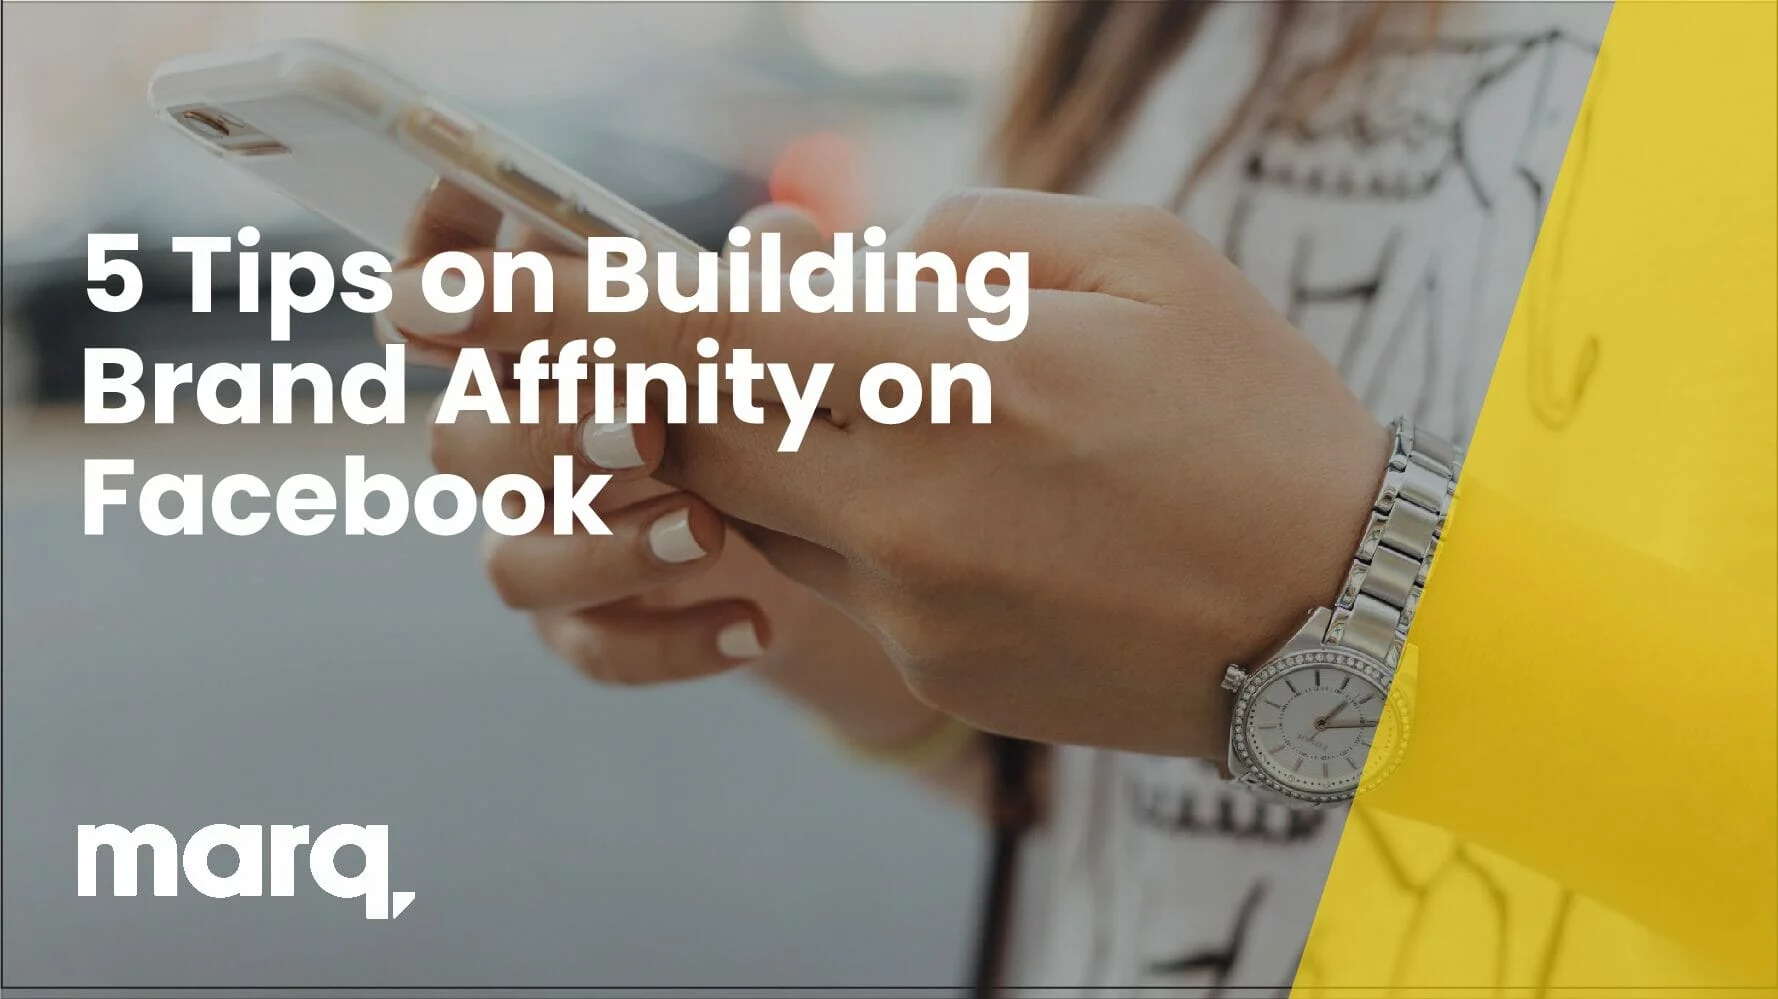 5 Tips on Building Brand Affinity on Facebook